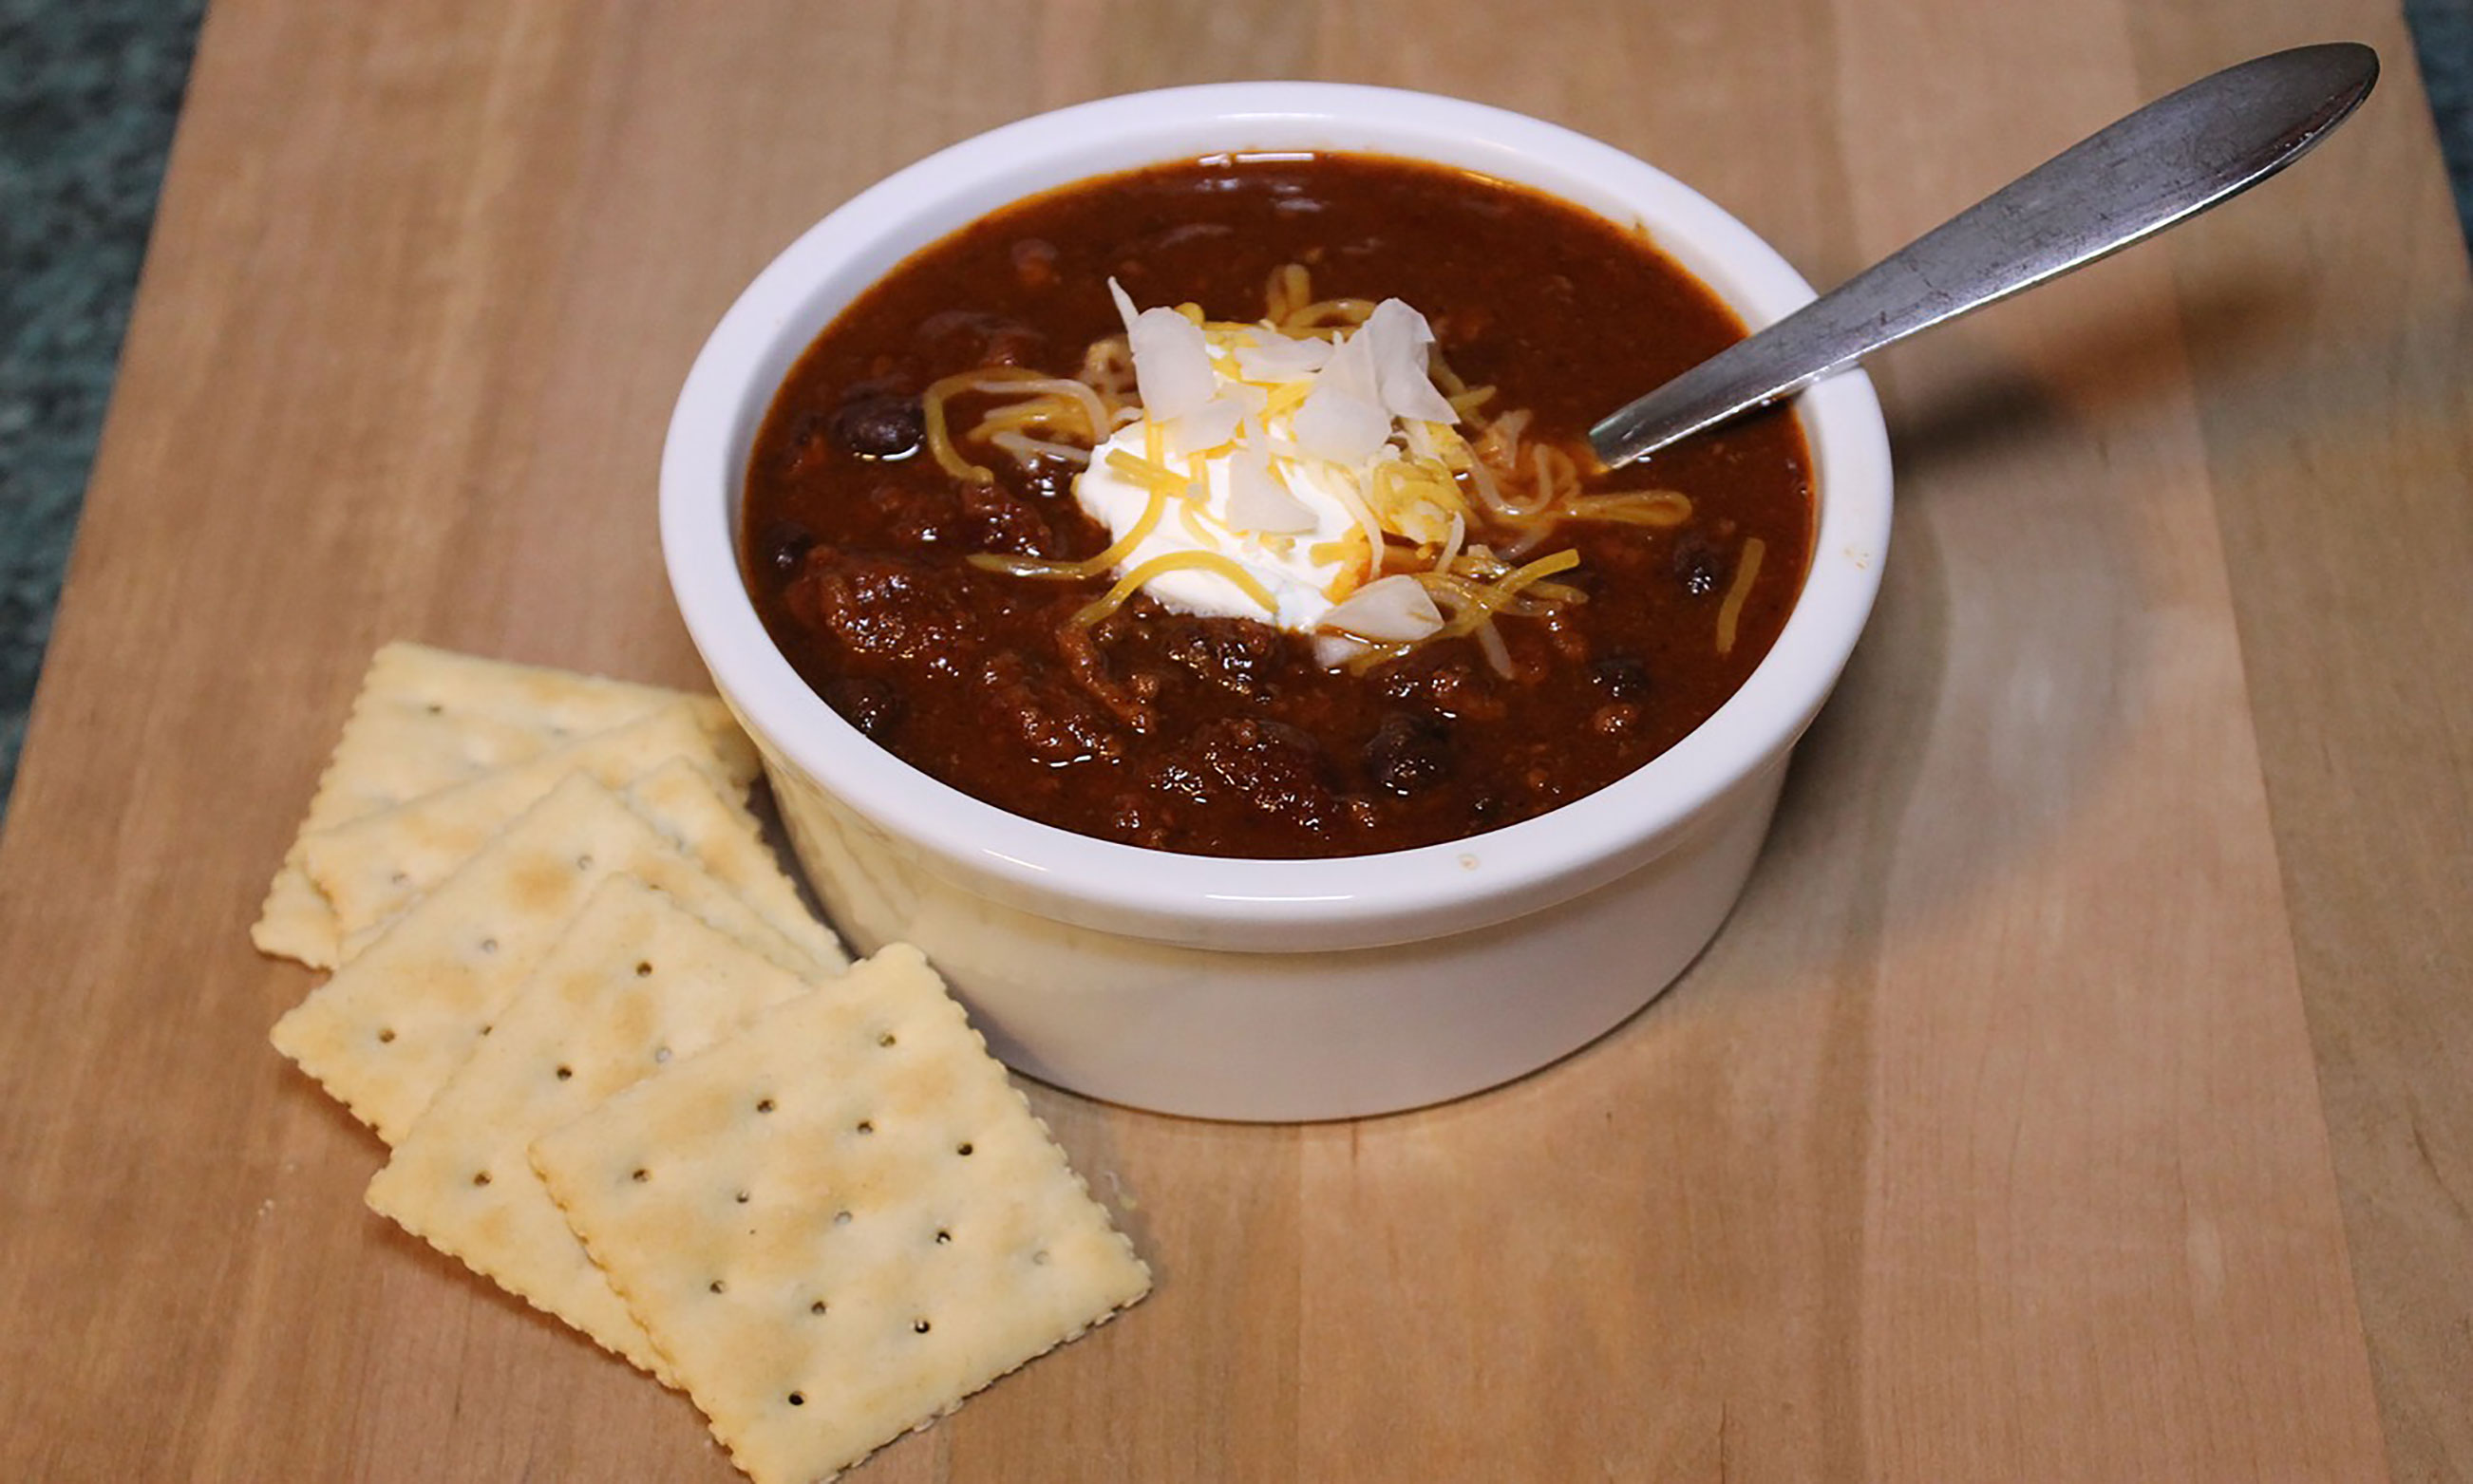 A bowl of chili topped with sour cream, onions, and cheese with saltine crackers on the side.